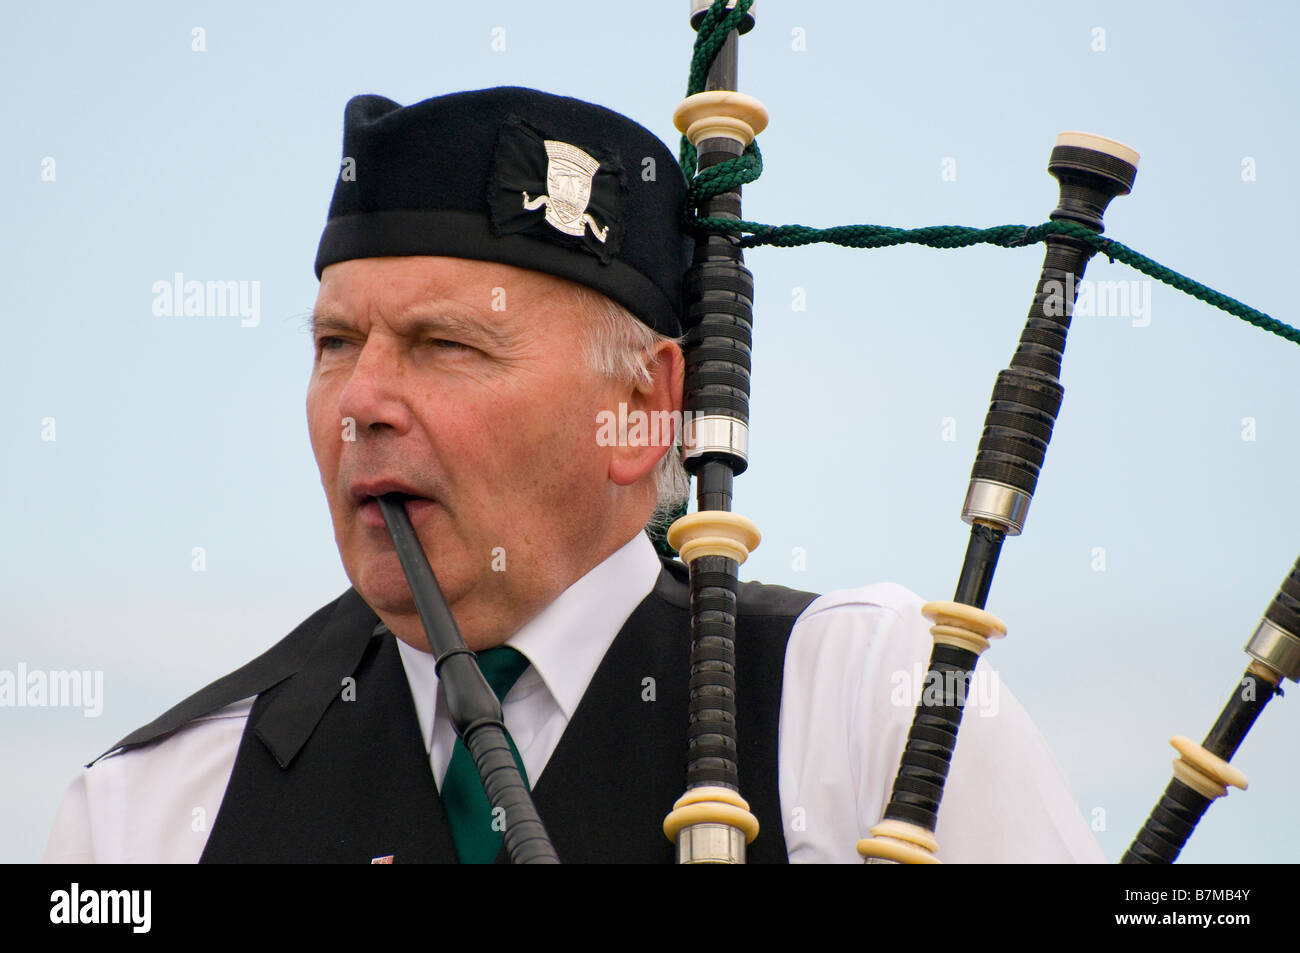 Piper playing the bagpipes at a highland games, Scotland. Stock Photo